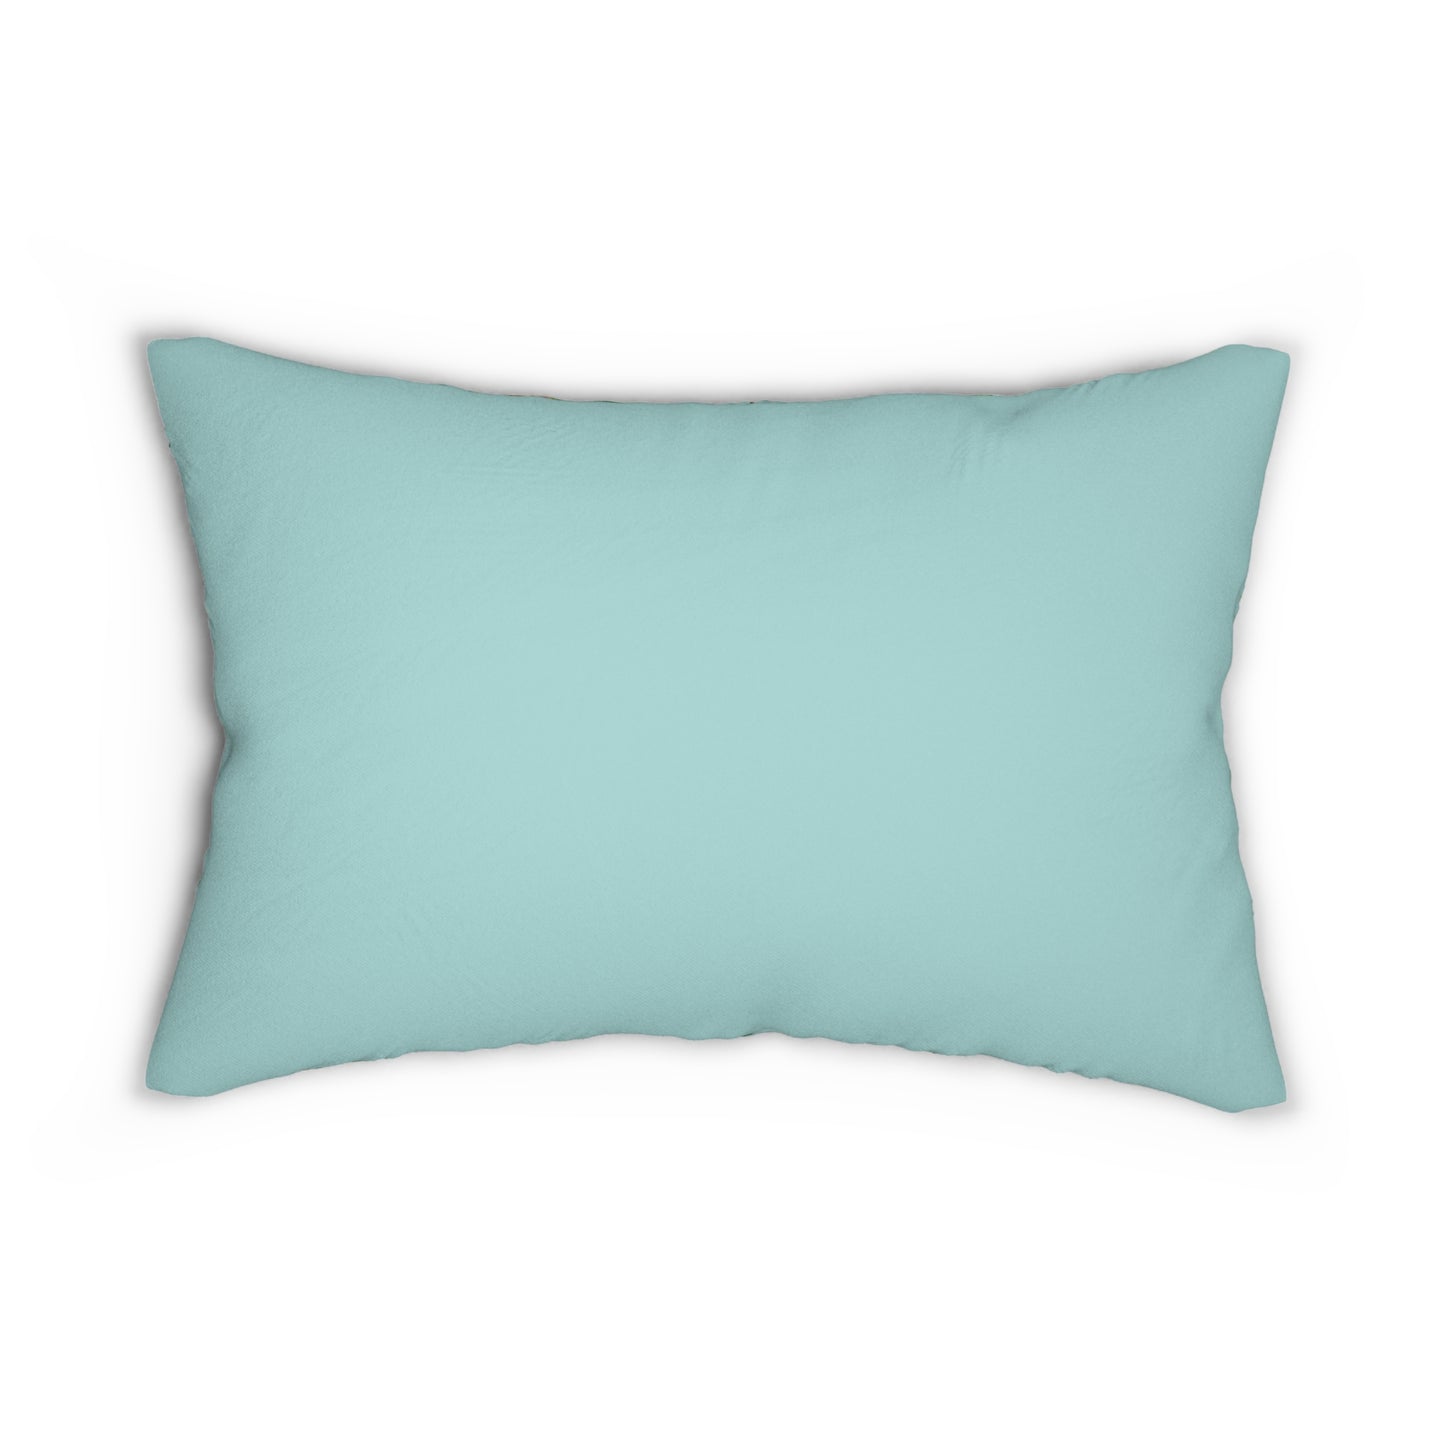 william-morris-co-lumbar-cushion-bird-and-pomegranate-collection-tiffany-blue-3